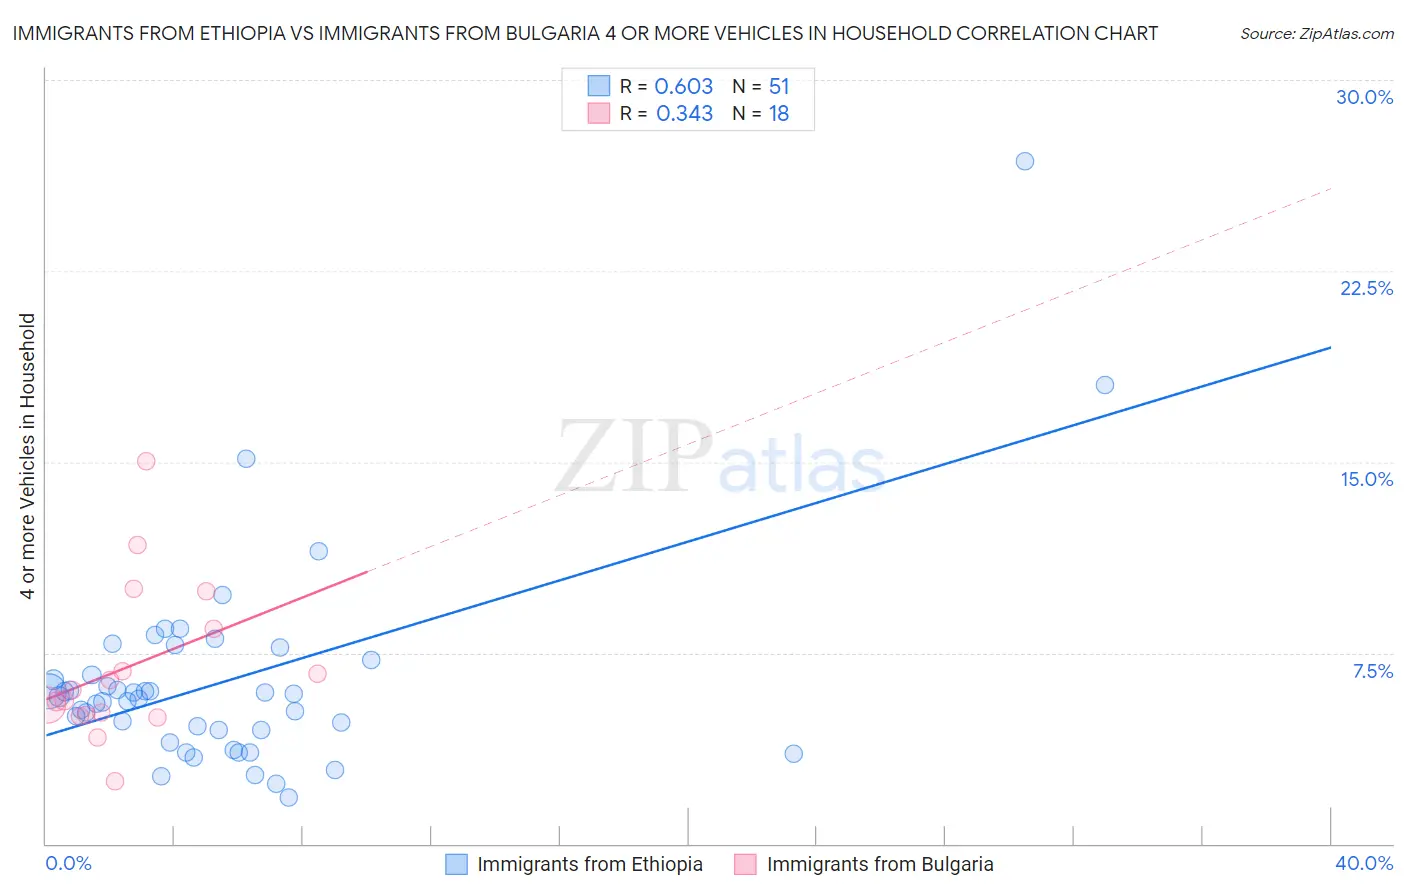 Immigrants from Ethiopia vs Immigrants from Bulgaria 4 or more Vehicles in Household